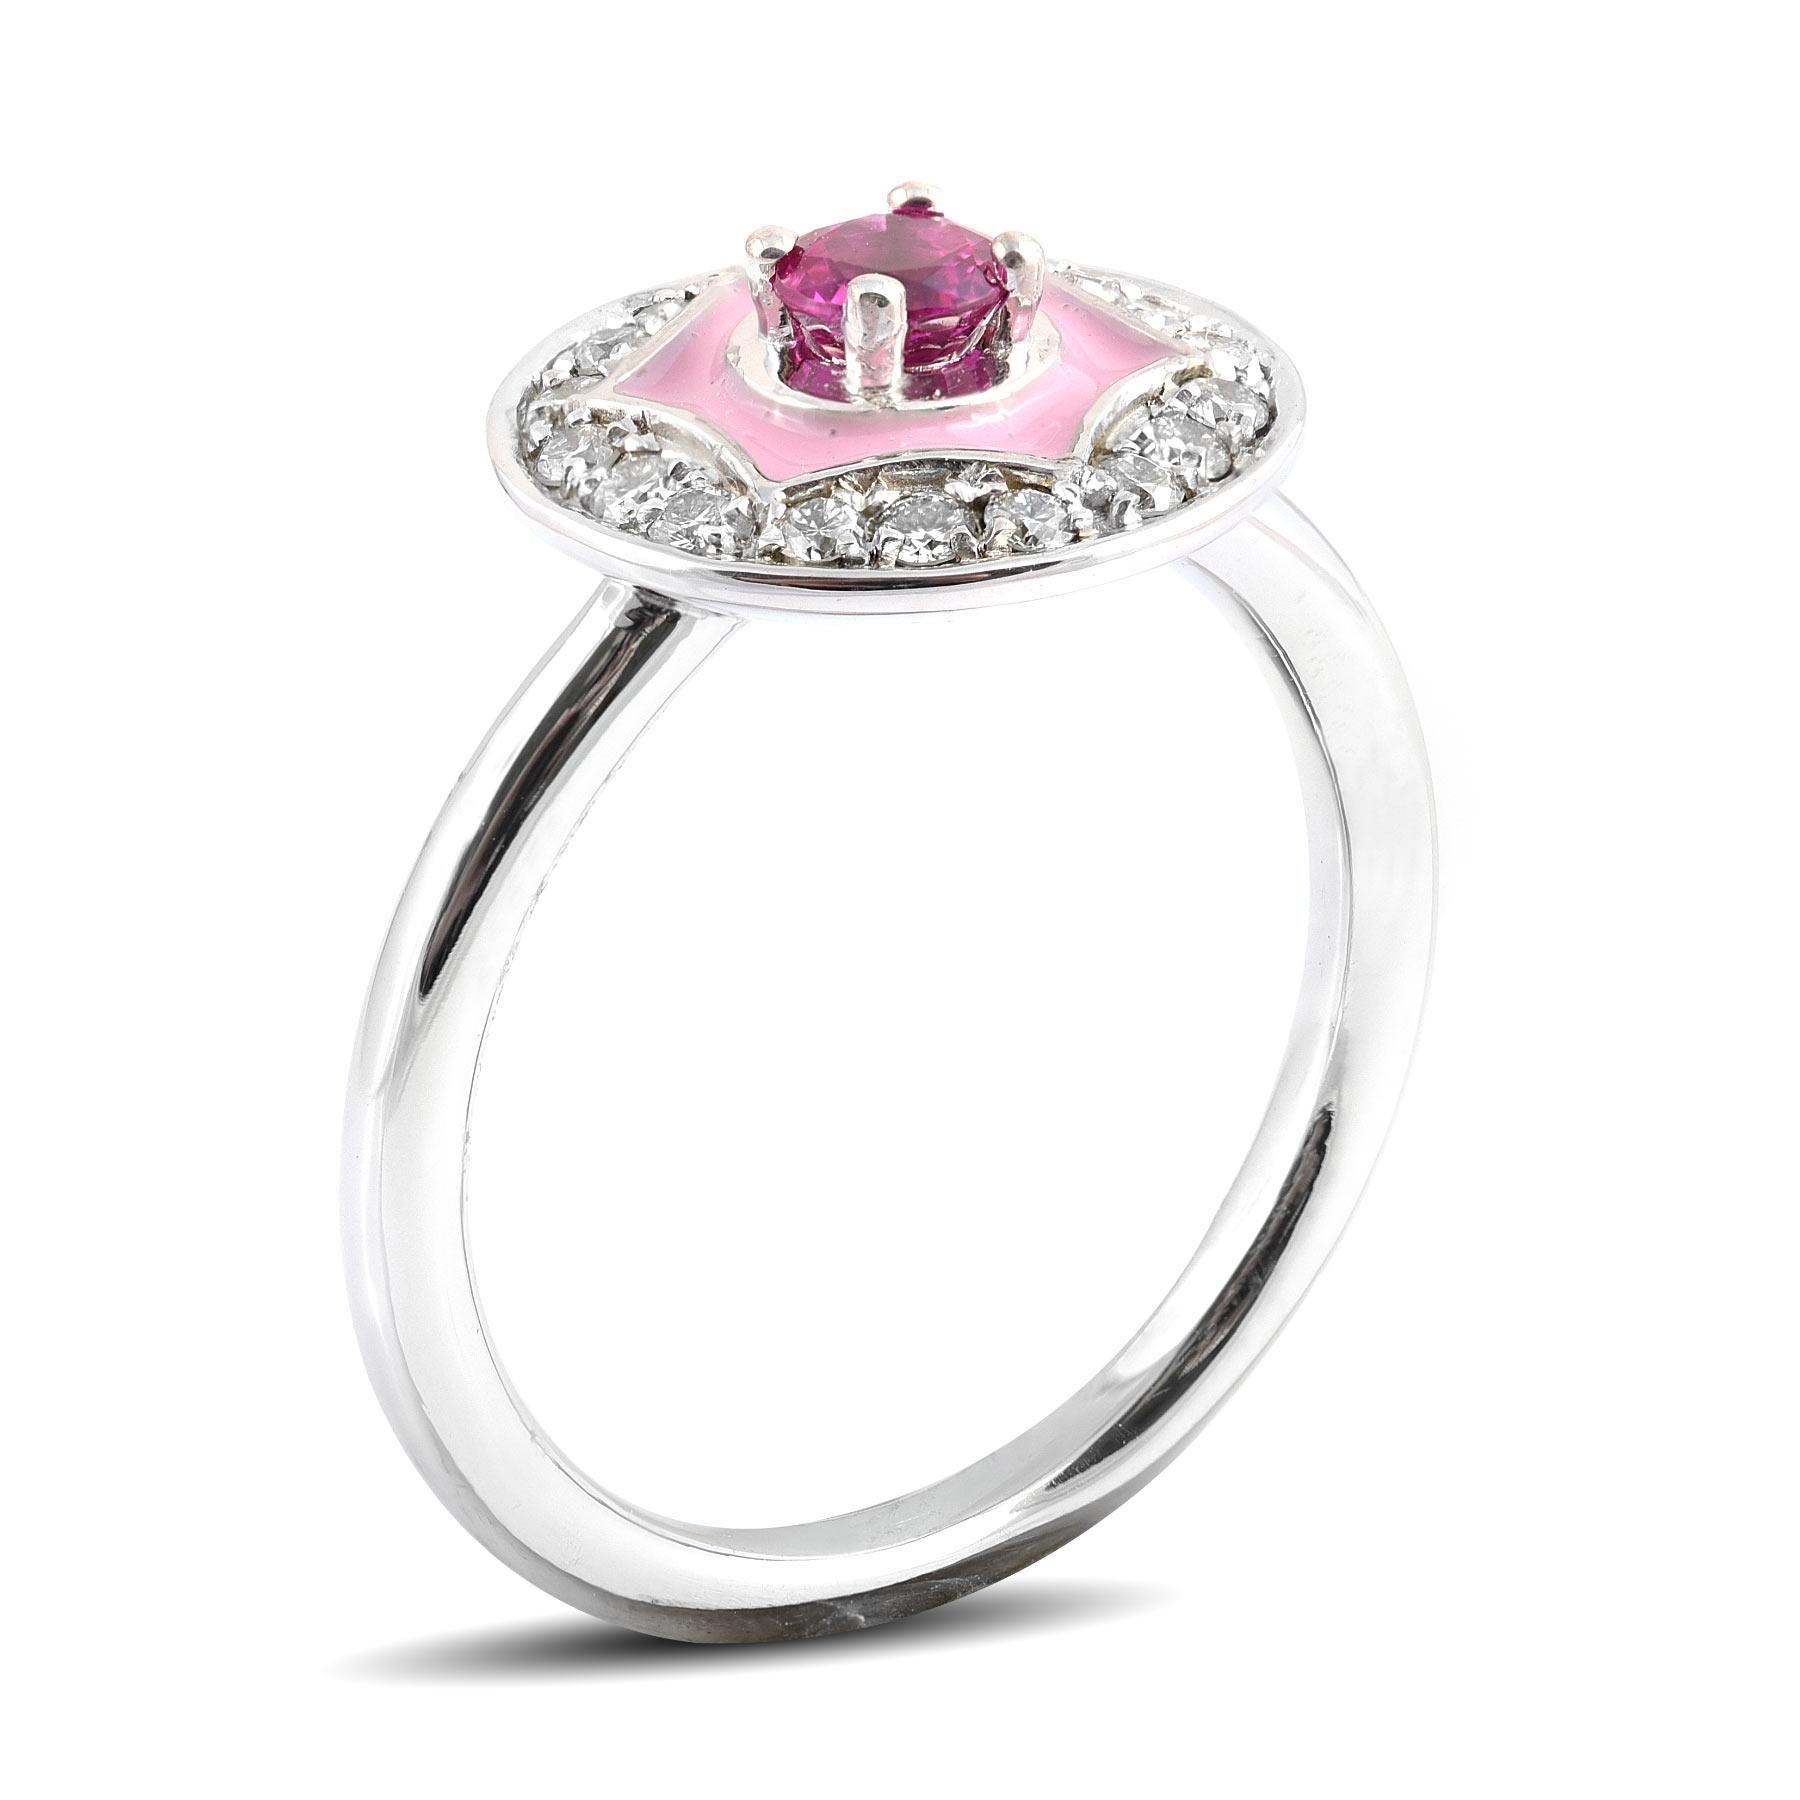 Here is the ring perfect for a girl who likes a burst of candy pink. Set with a lustrous, vivid Ruby, the pink enamel that surrounds the gem brings the colors together. A delicate choice that represents femininity, this ring has been crafted in 14K